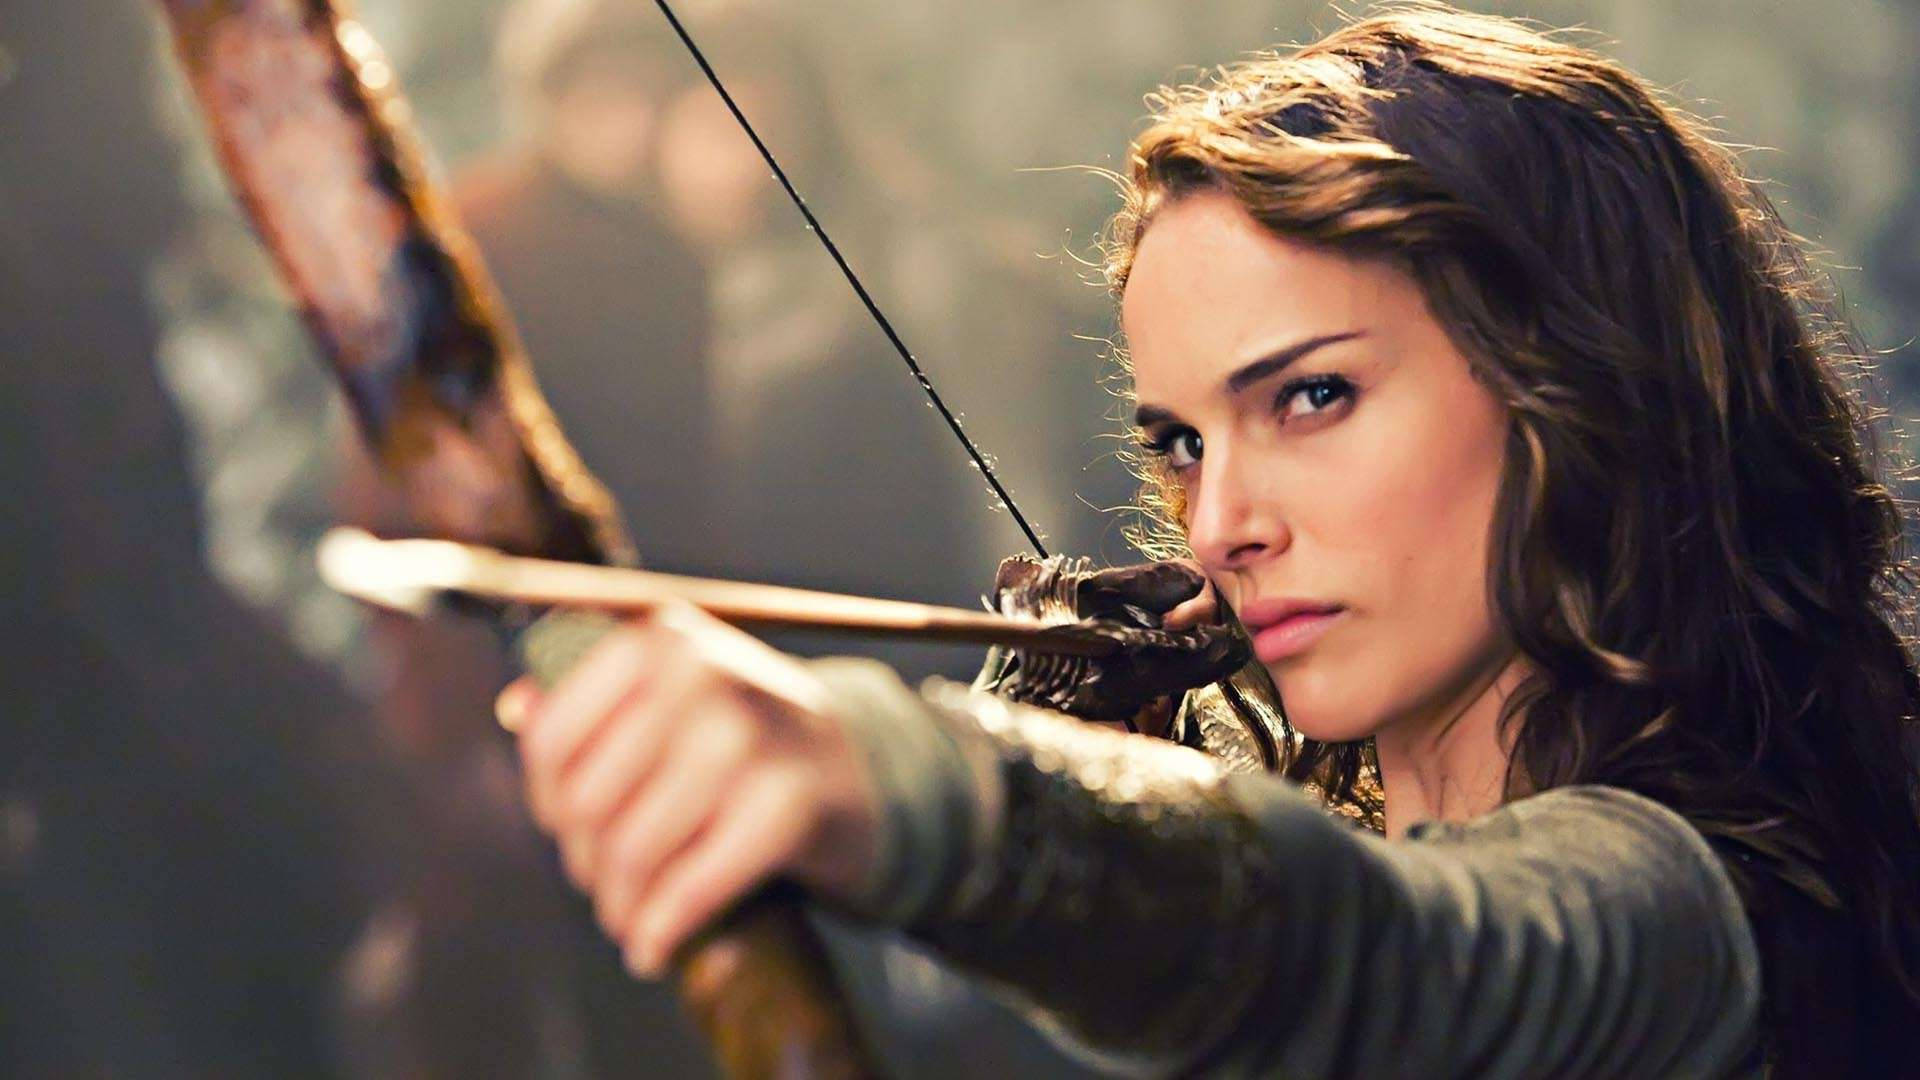 Natalie Portman With Bow And Arrow Wallpaper